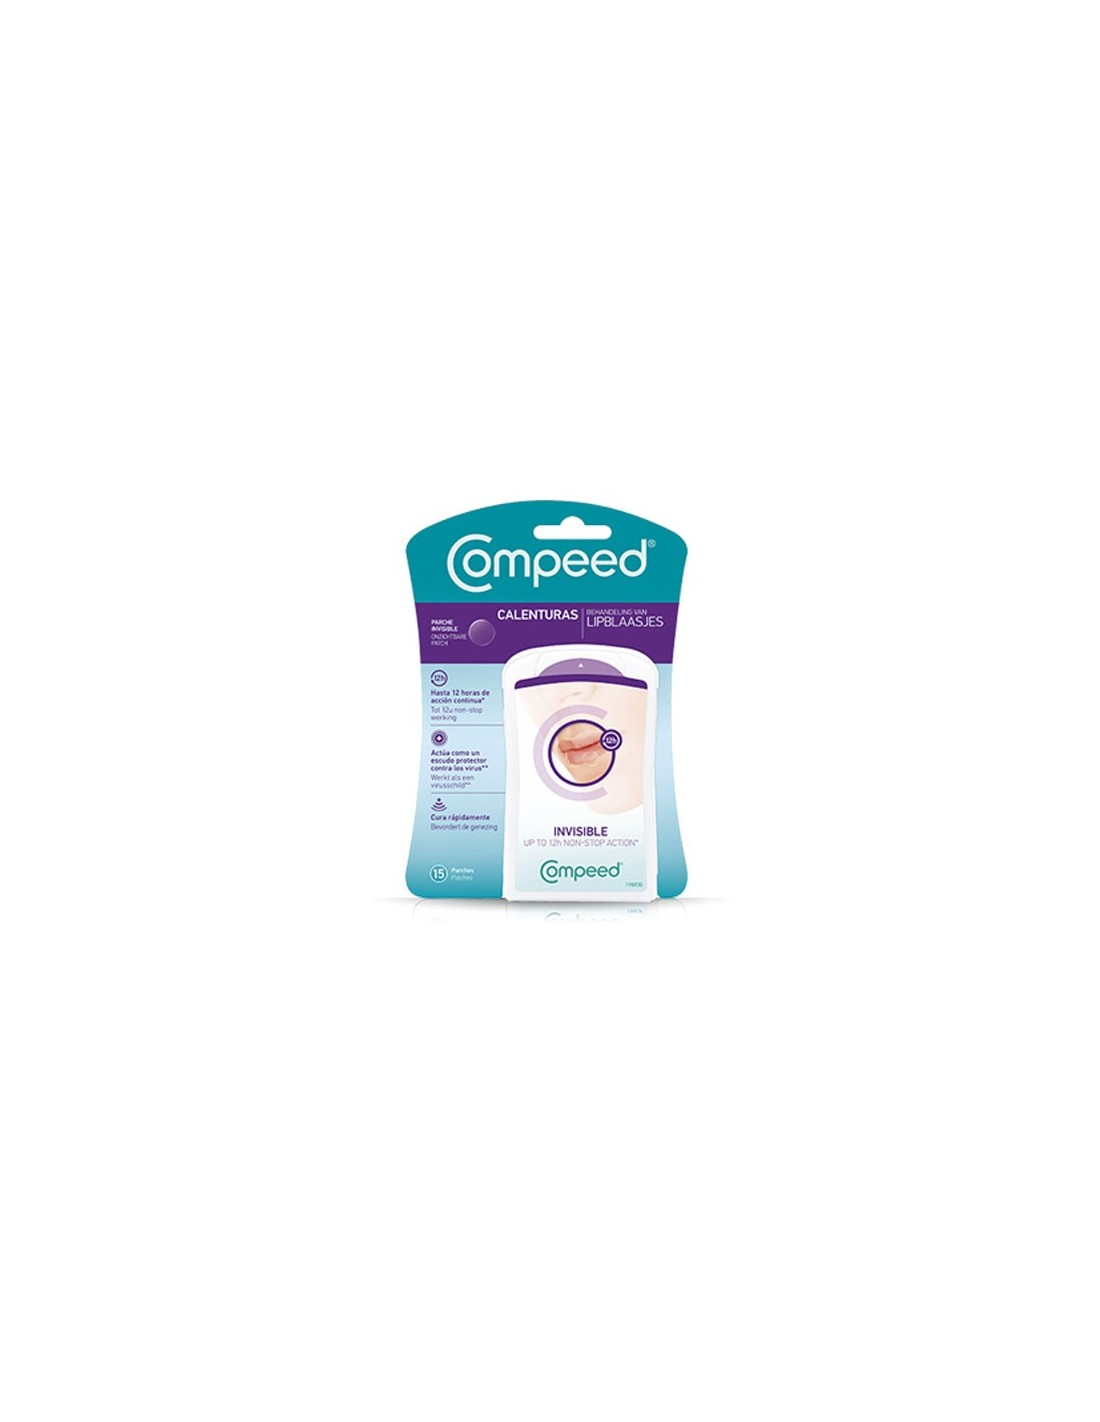 Compeed Parches Herpes 15 Uds